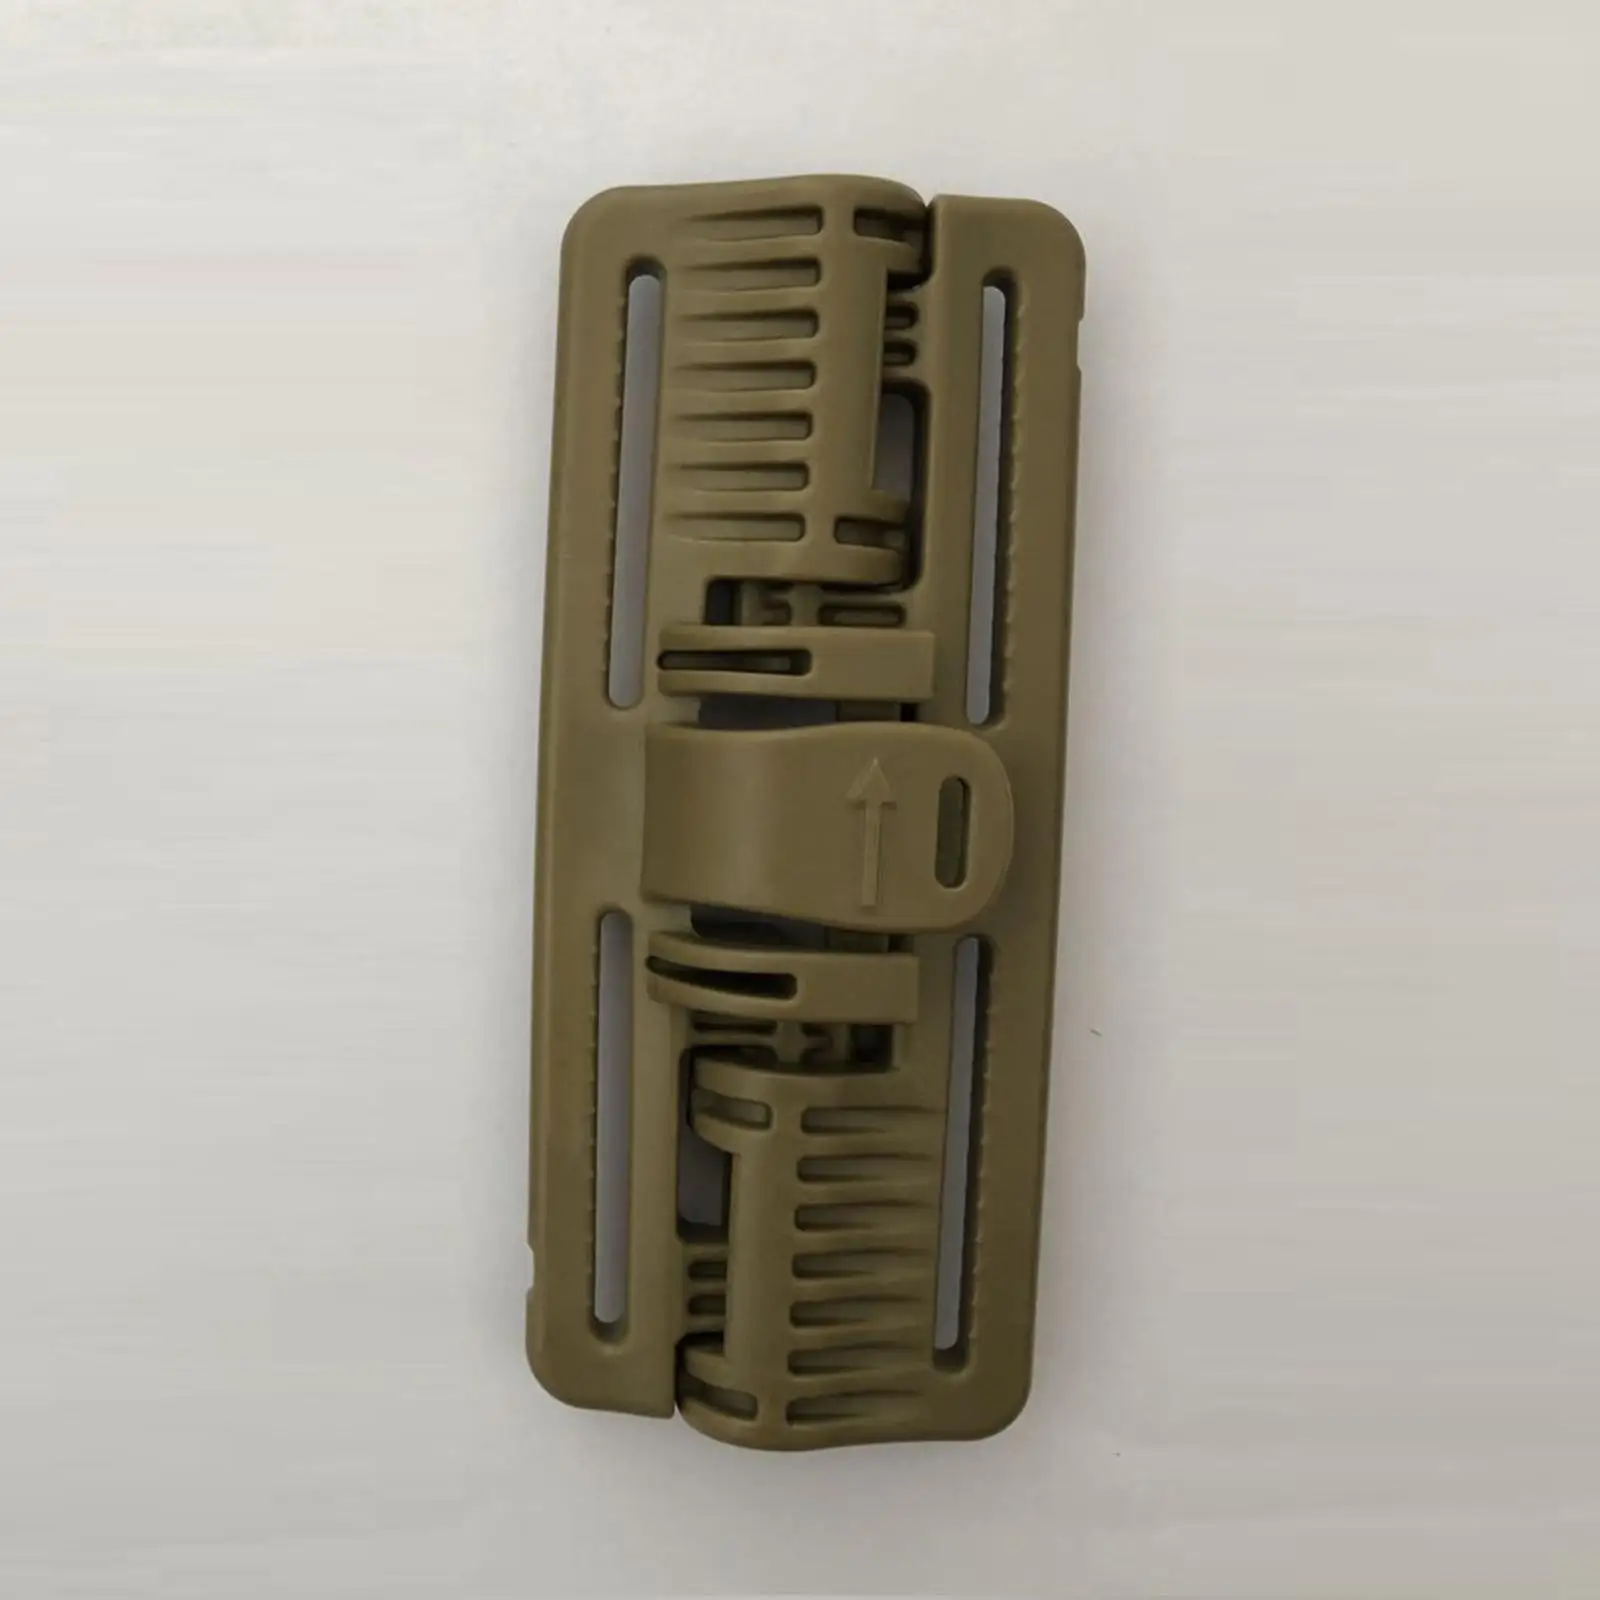 Vest Quick Release Buckle Removal Buckle for 1.5 inch Strap Rapidly Open Connector Quick Disconnect for Plate Carrier Outdoor